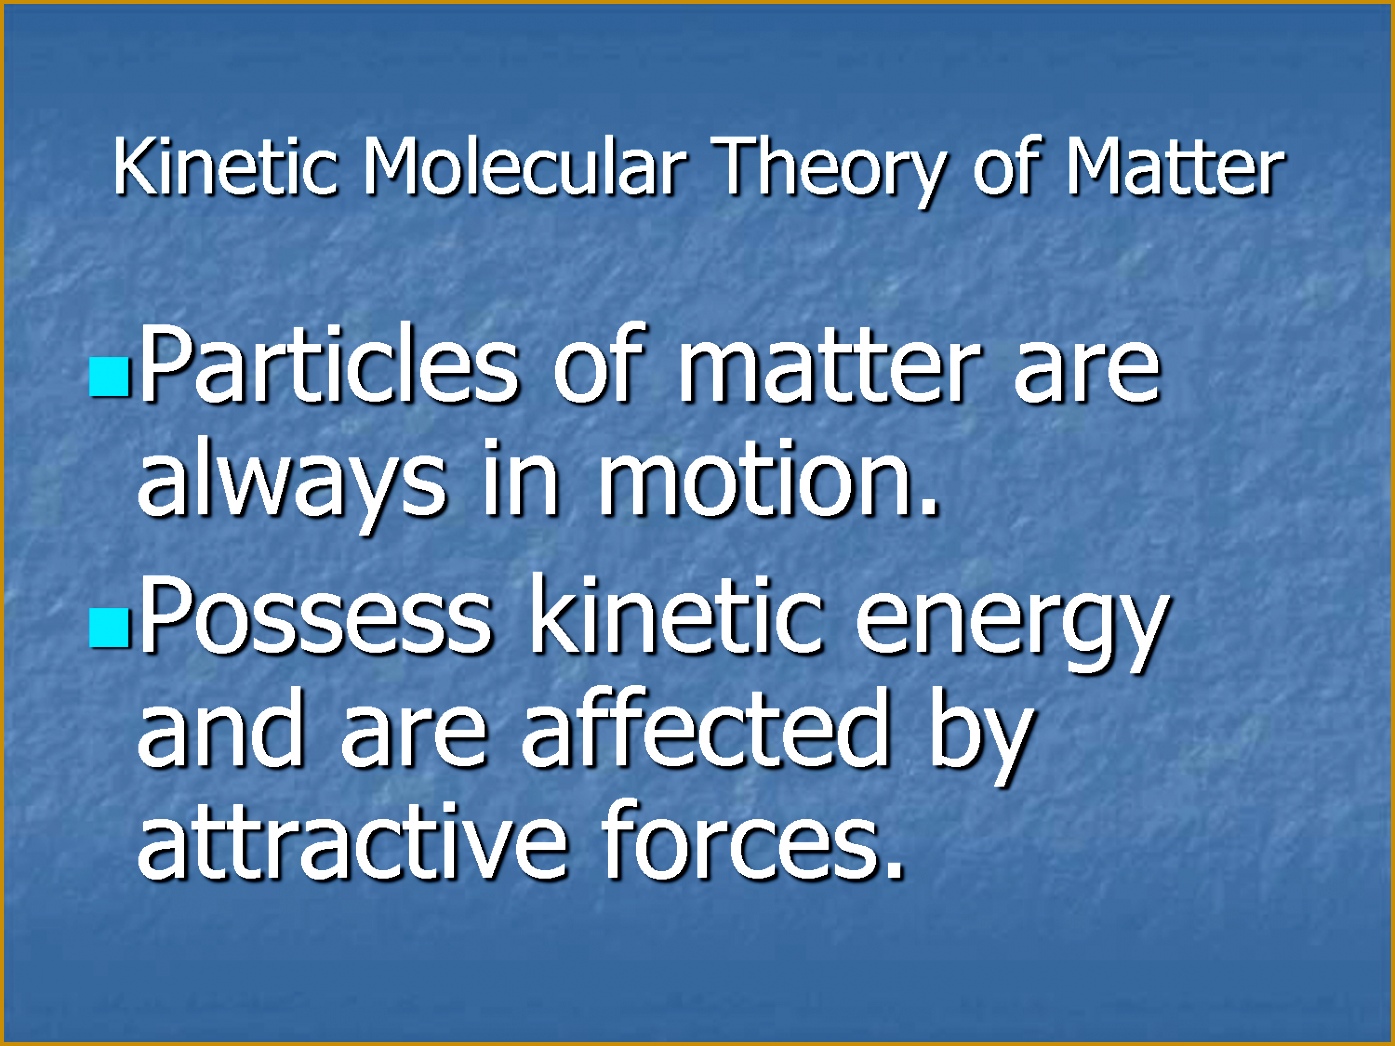 Kinetic Molecular Theory of Matter 10461395